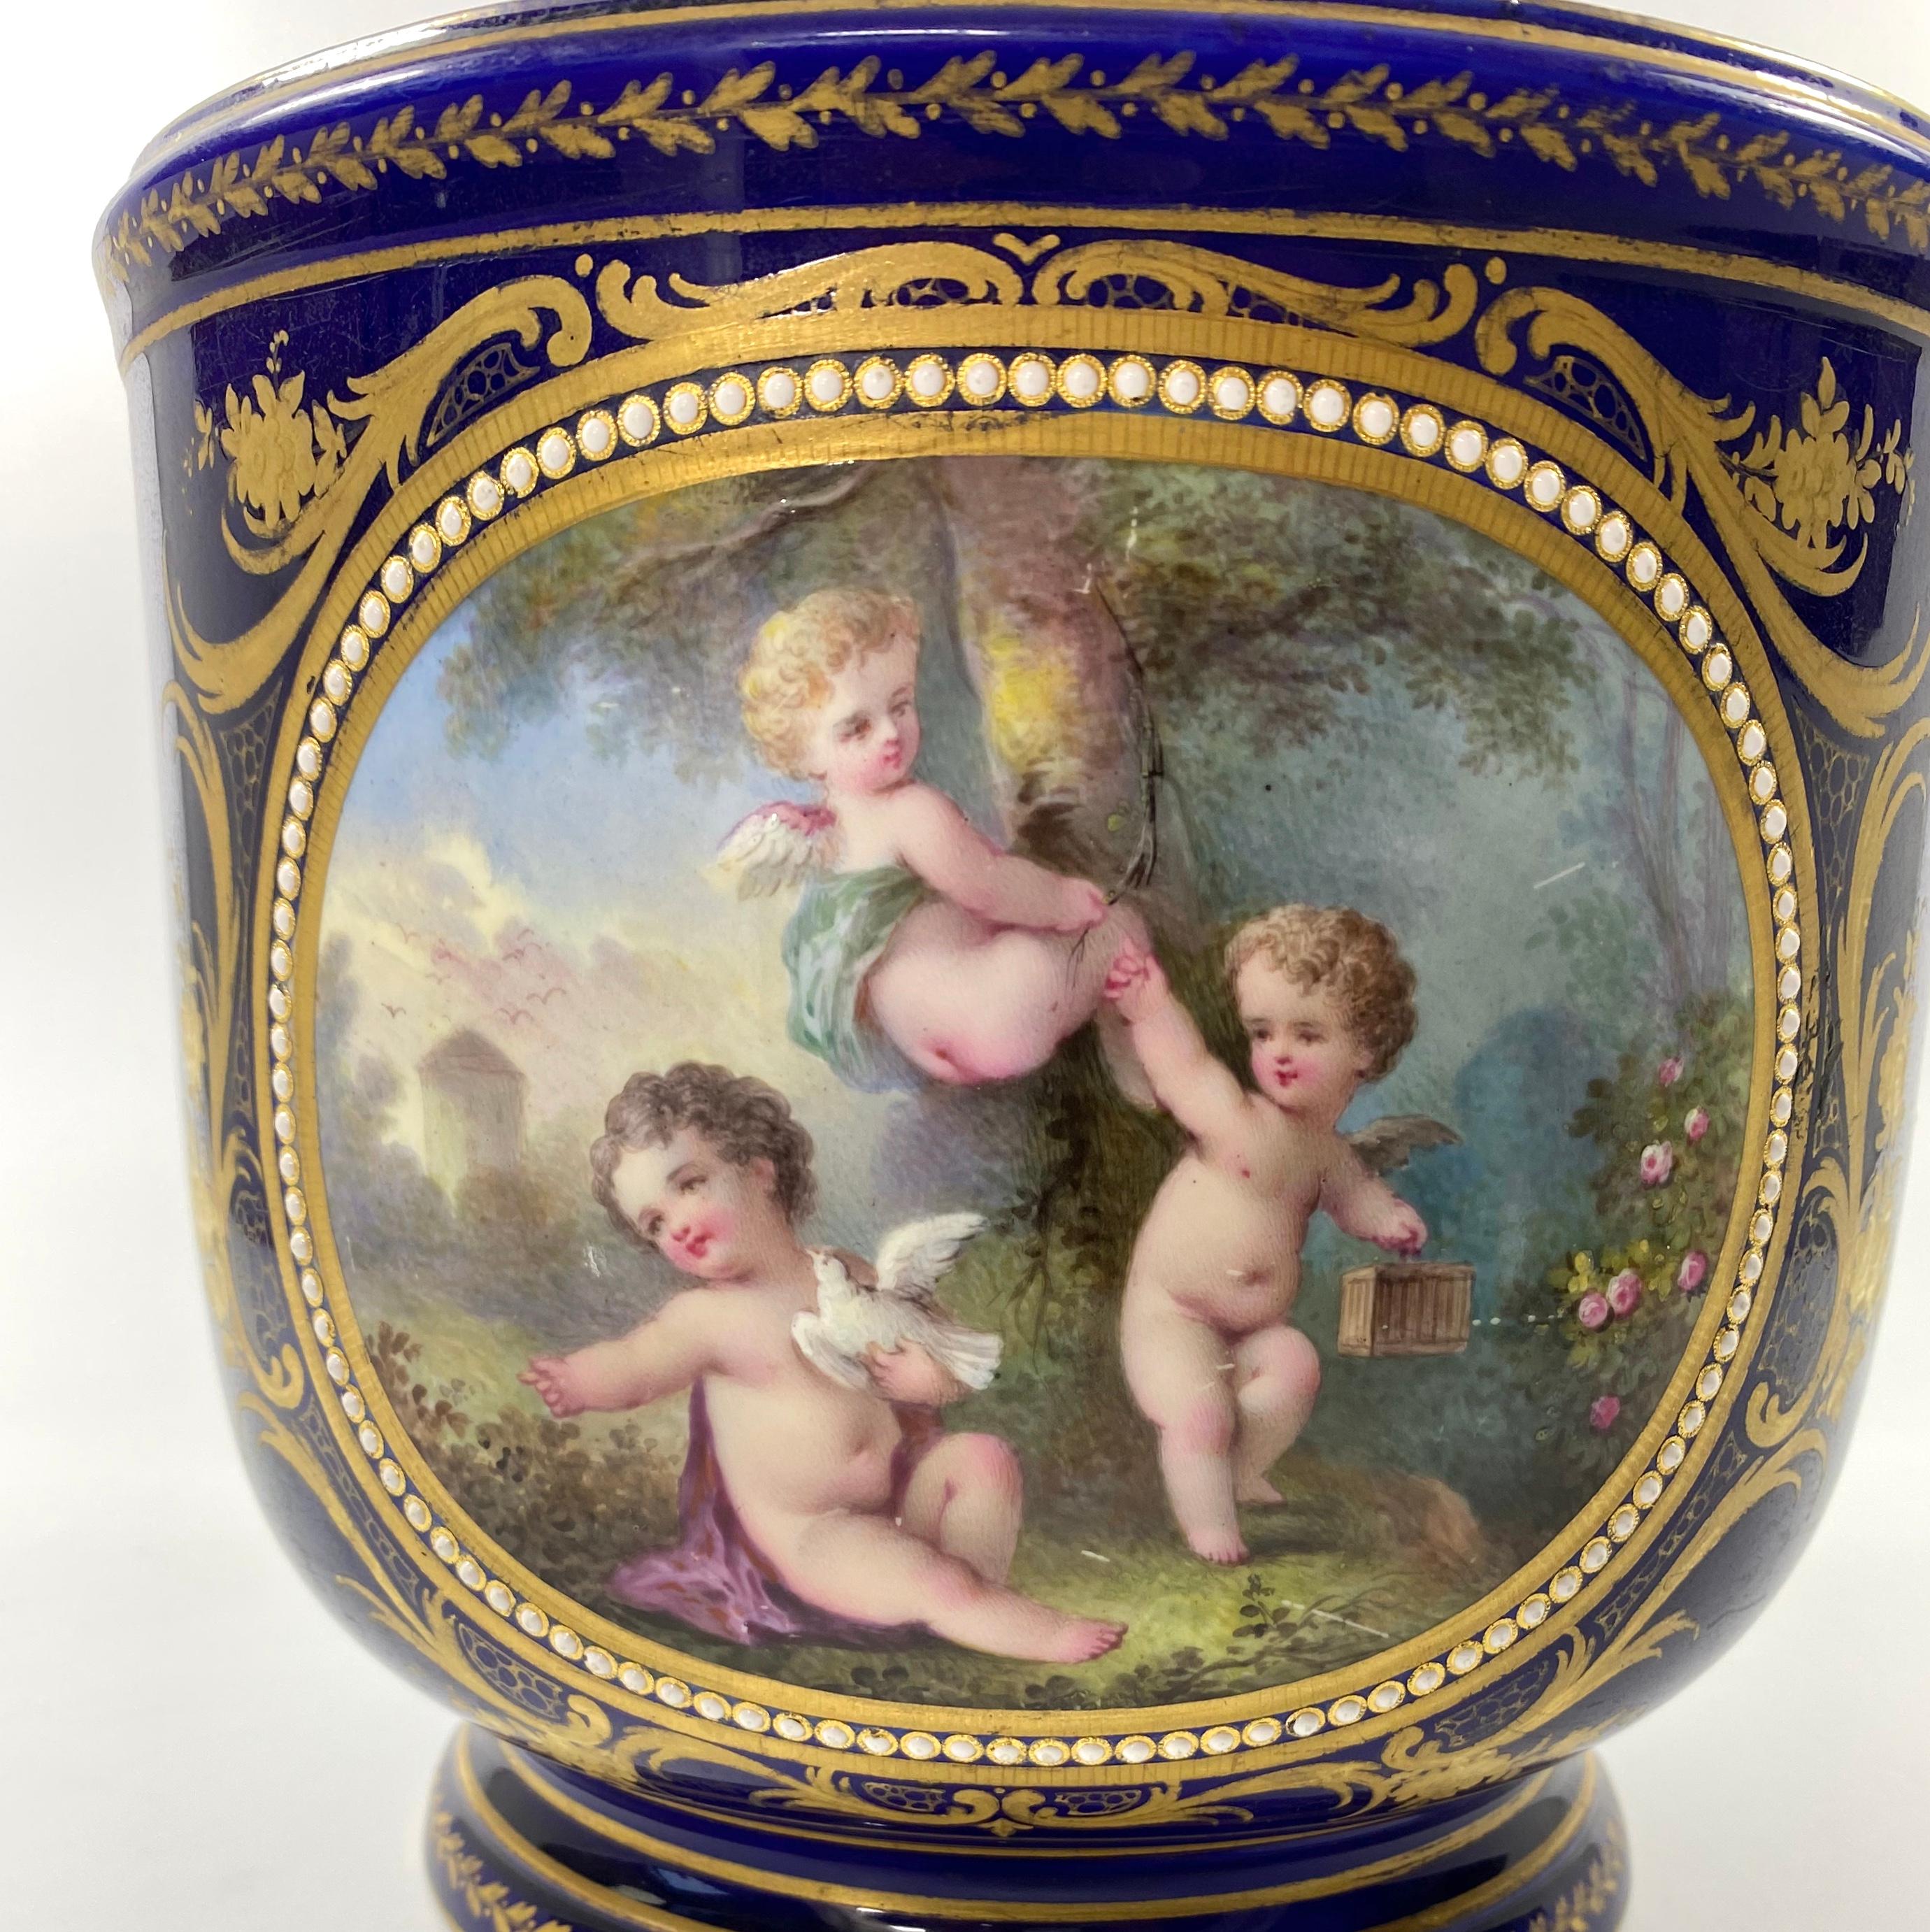 ‘Sevres’ style large porcelain ‘Jewelled’ cache pot, French, c. 1870. Finely painted with a panel of three Putti at play, in an extensive garden landscape, within an oval ‘jewelled’ border.
The reverse with a panel of doves, flying amongst symbols